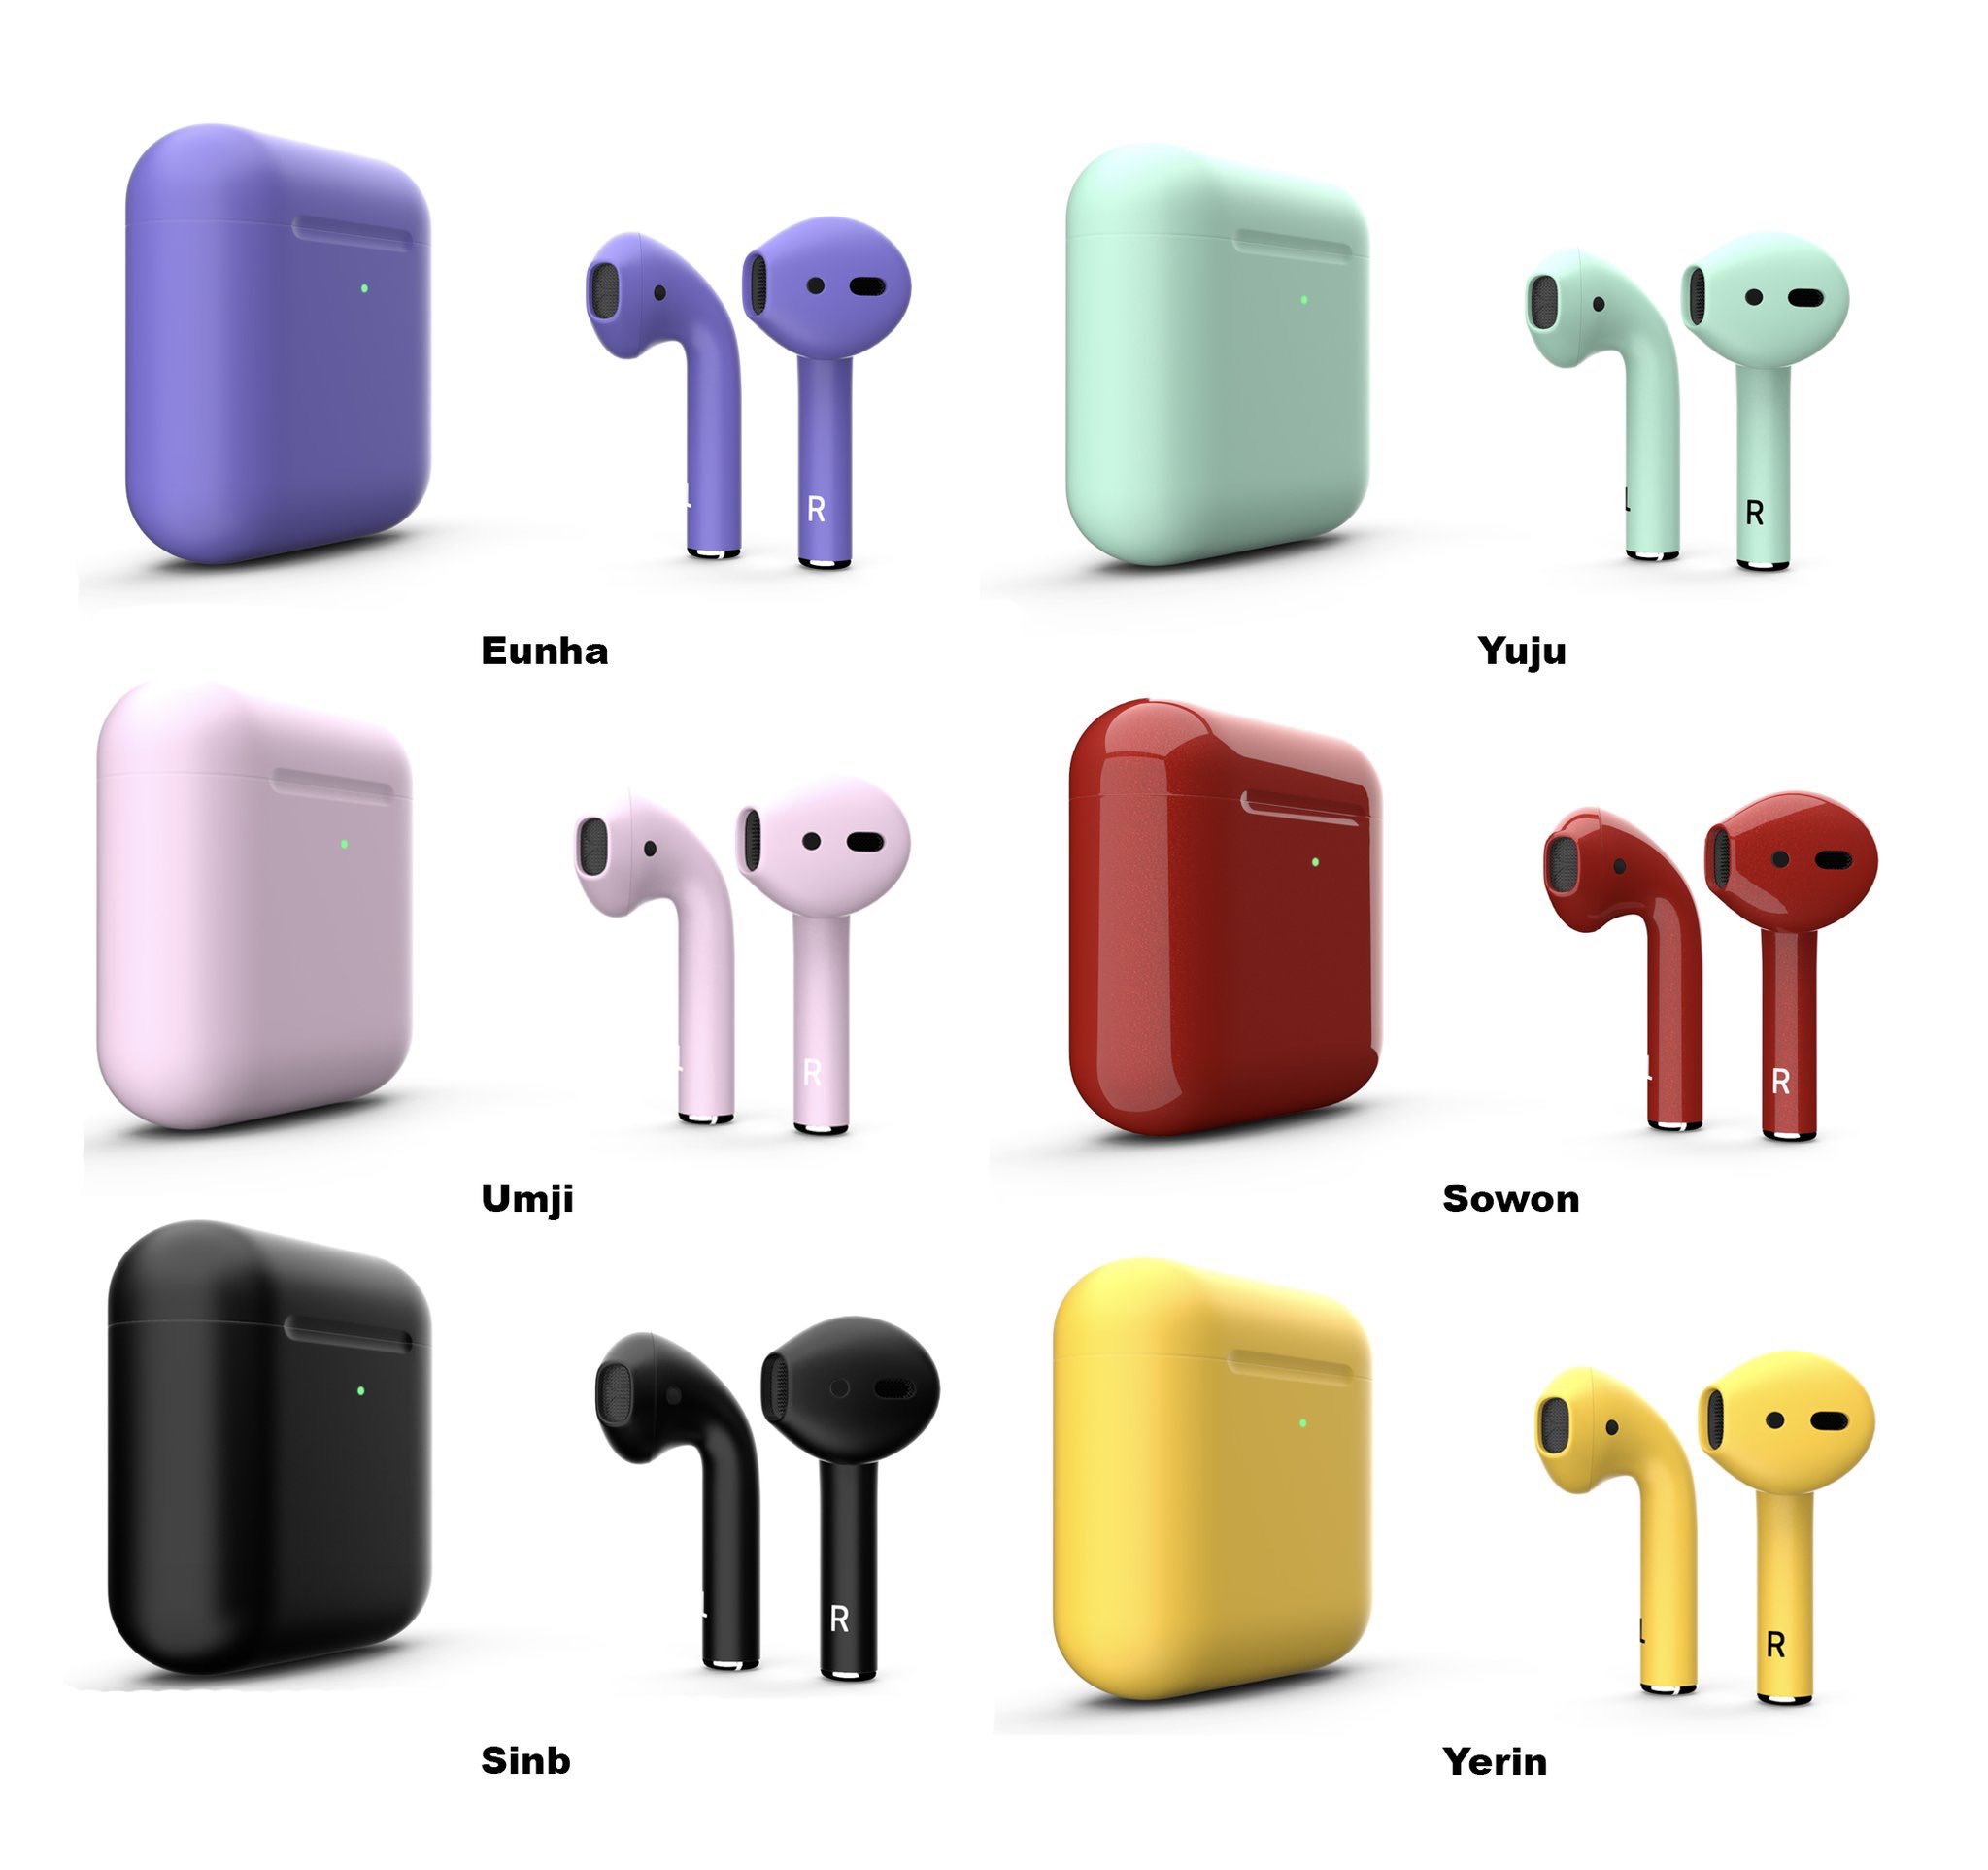 Limited indtryk Dalset alyssa on Twitter: "the colors for gfriend's airpods hmmm any opinions  https://t.co/yzlD6TGu0P" / X